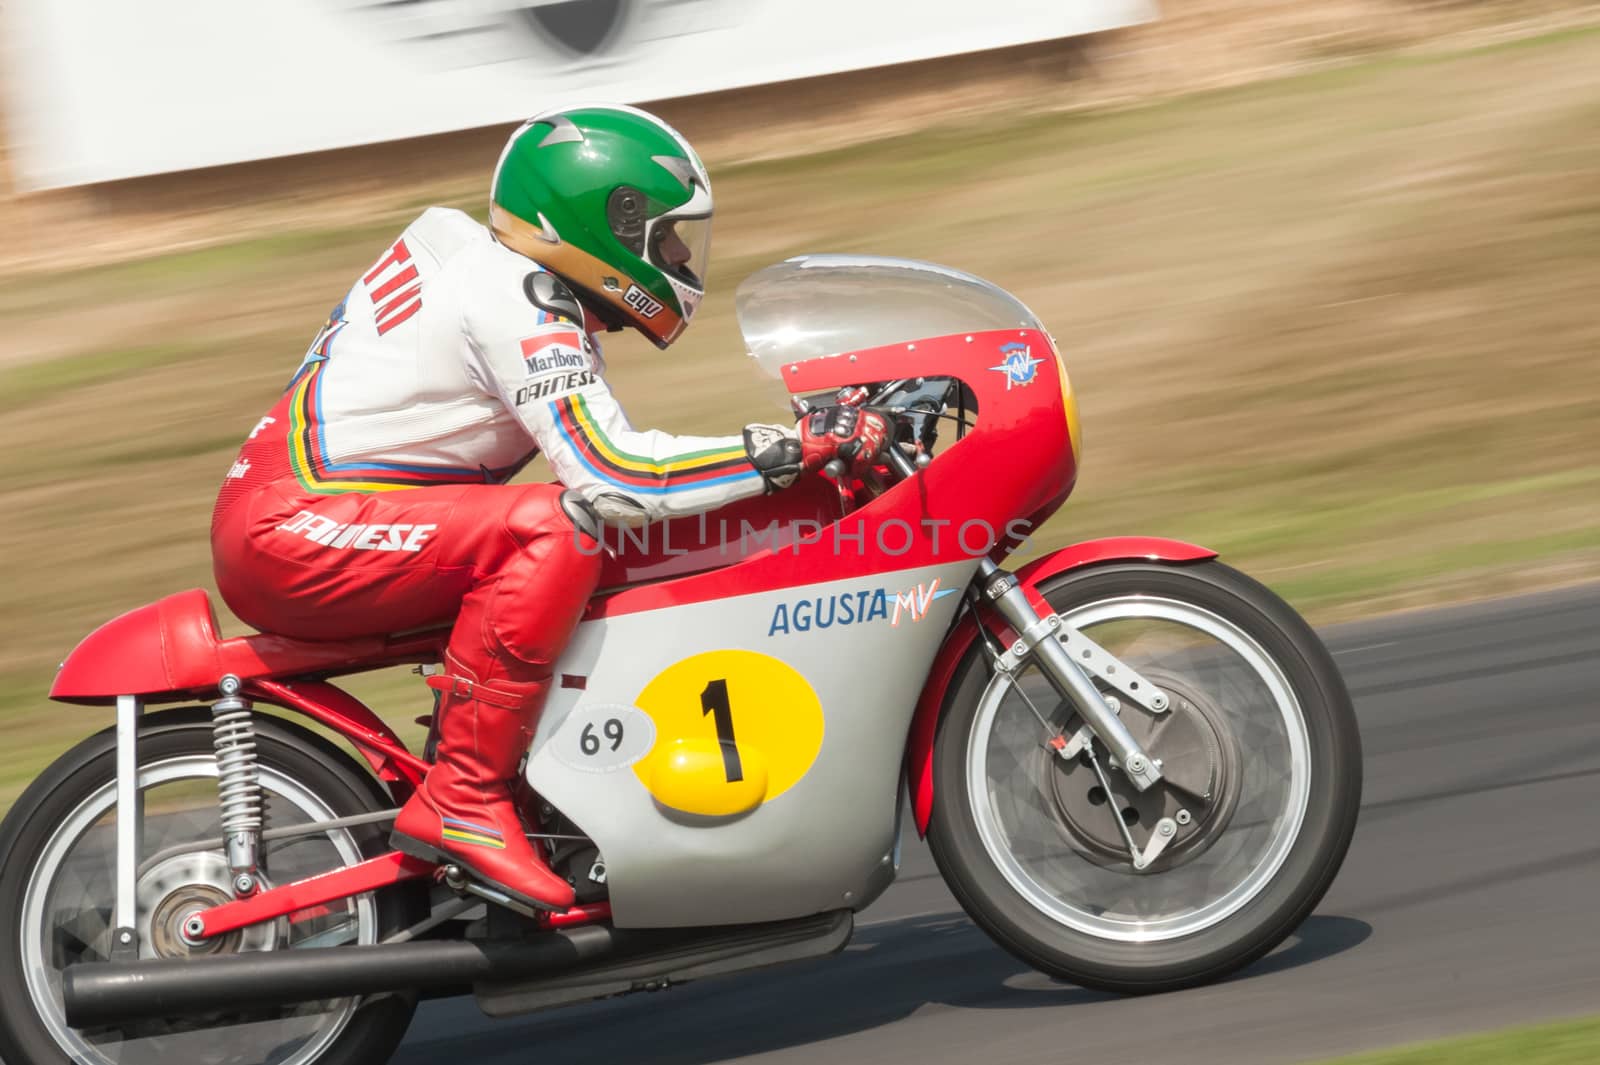 Goodwood, UK - July 13, 2013: Fifteen times motorcycle world champion Giacomo Agostini riding his classic MV Agusta motorcycle at the Festival of Speed event at Goodwood, UK